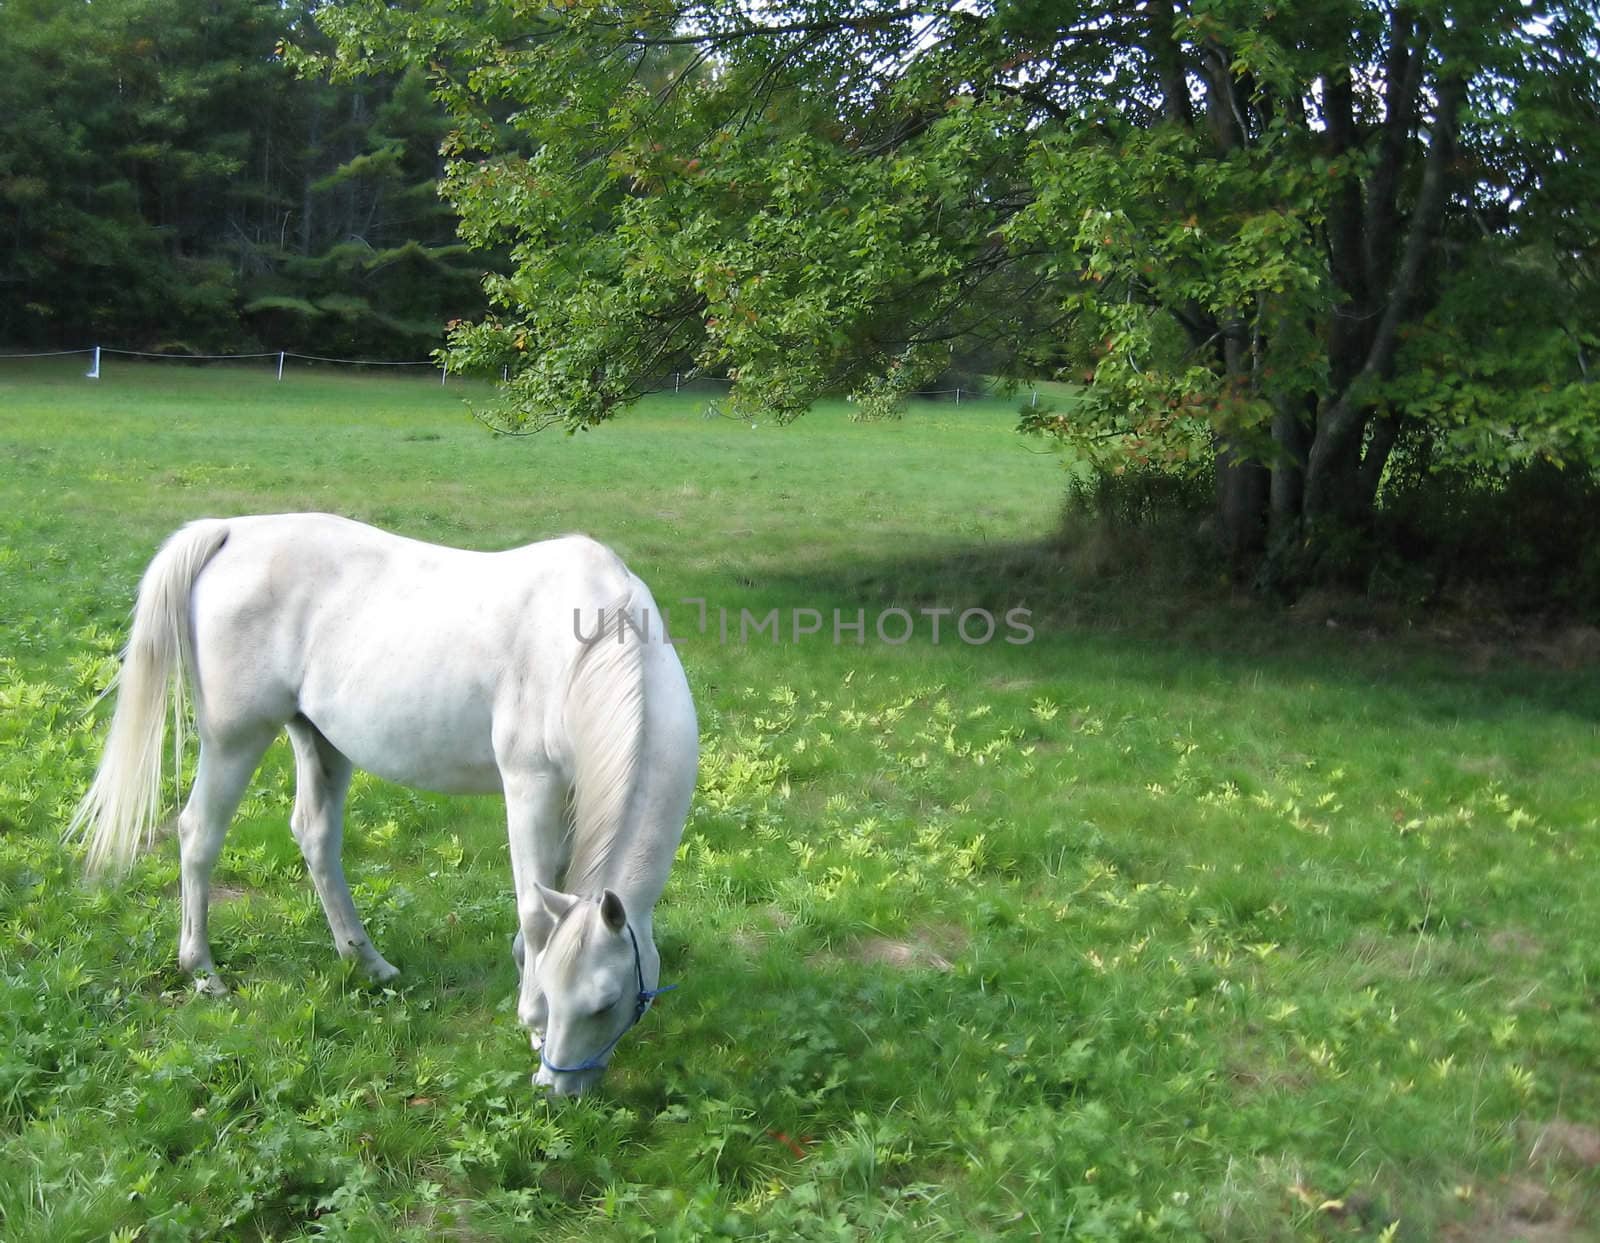 in a green pasture, tree in background, a dappled gray horse peacefully grazes